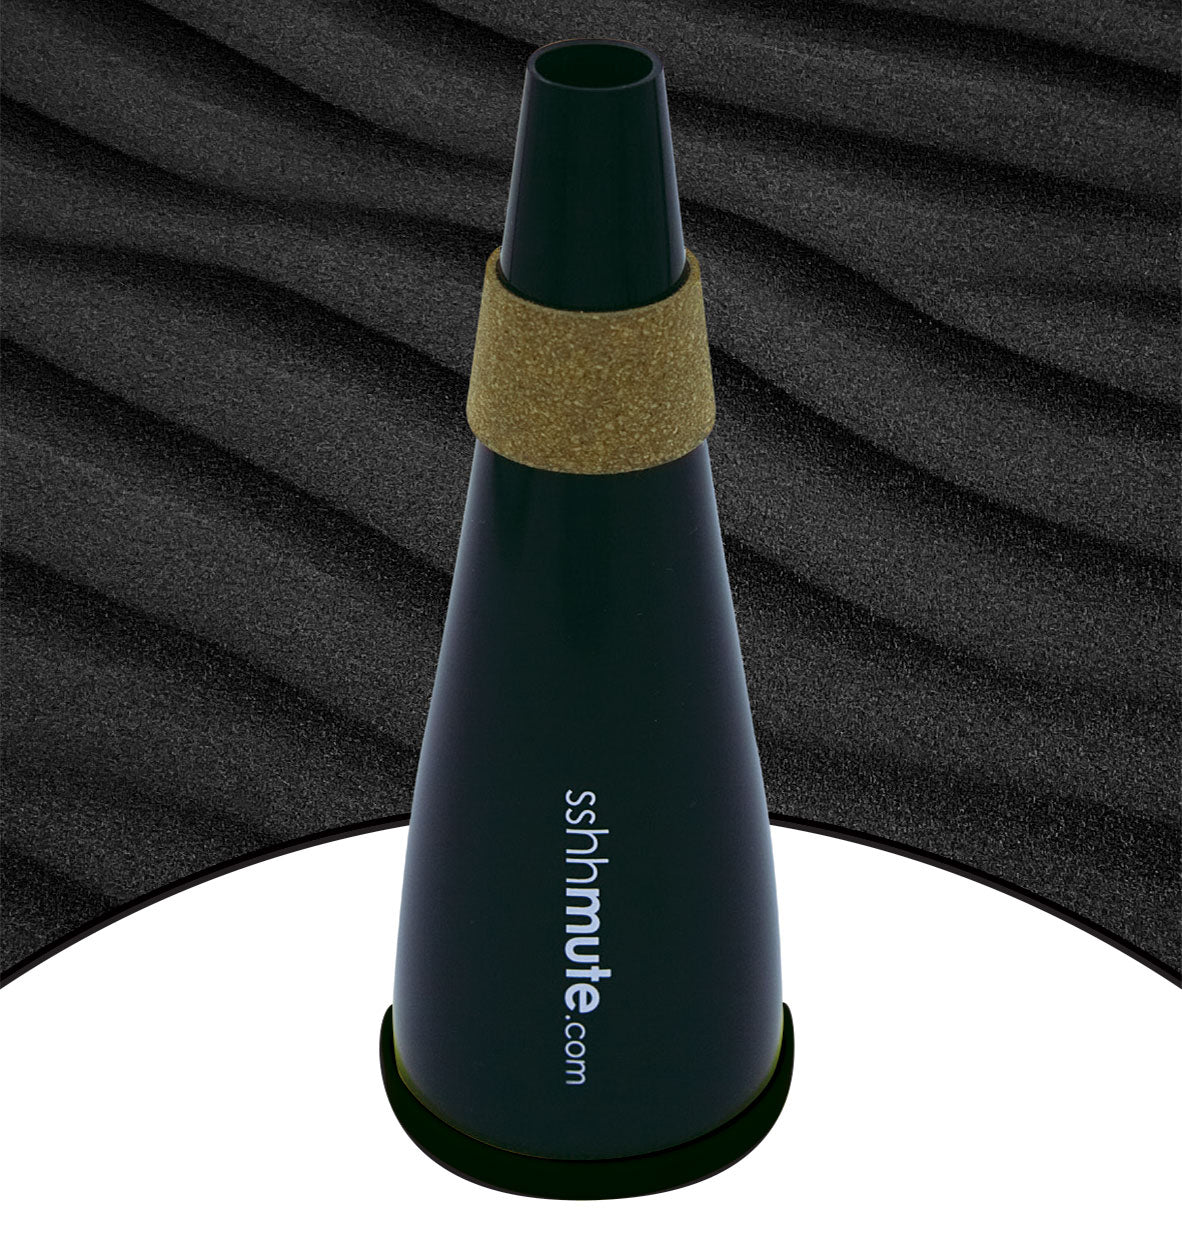 Get your hands on the best brass practice mute on the market!